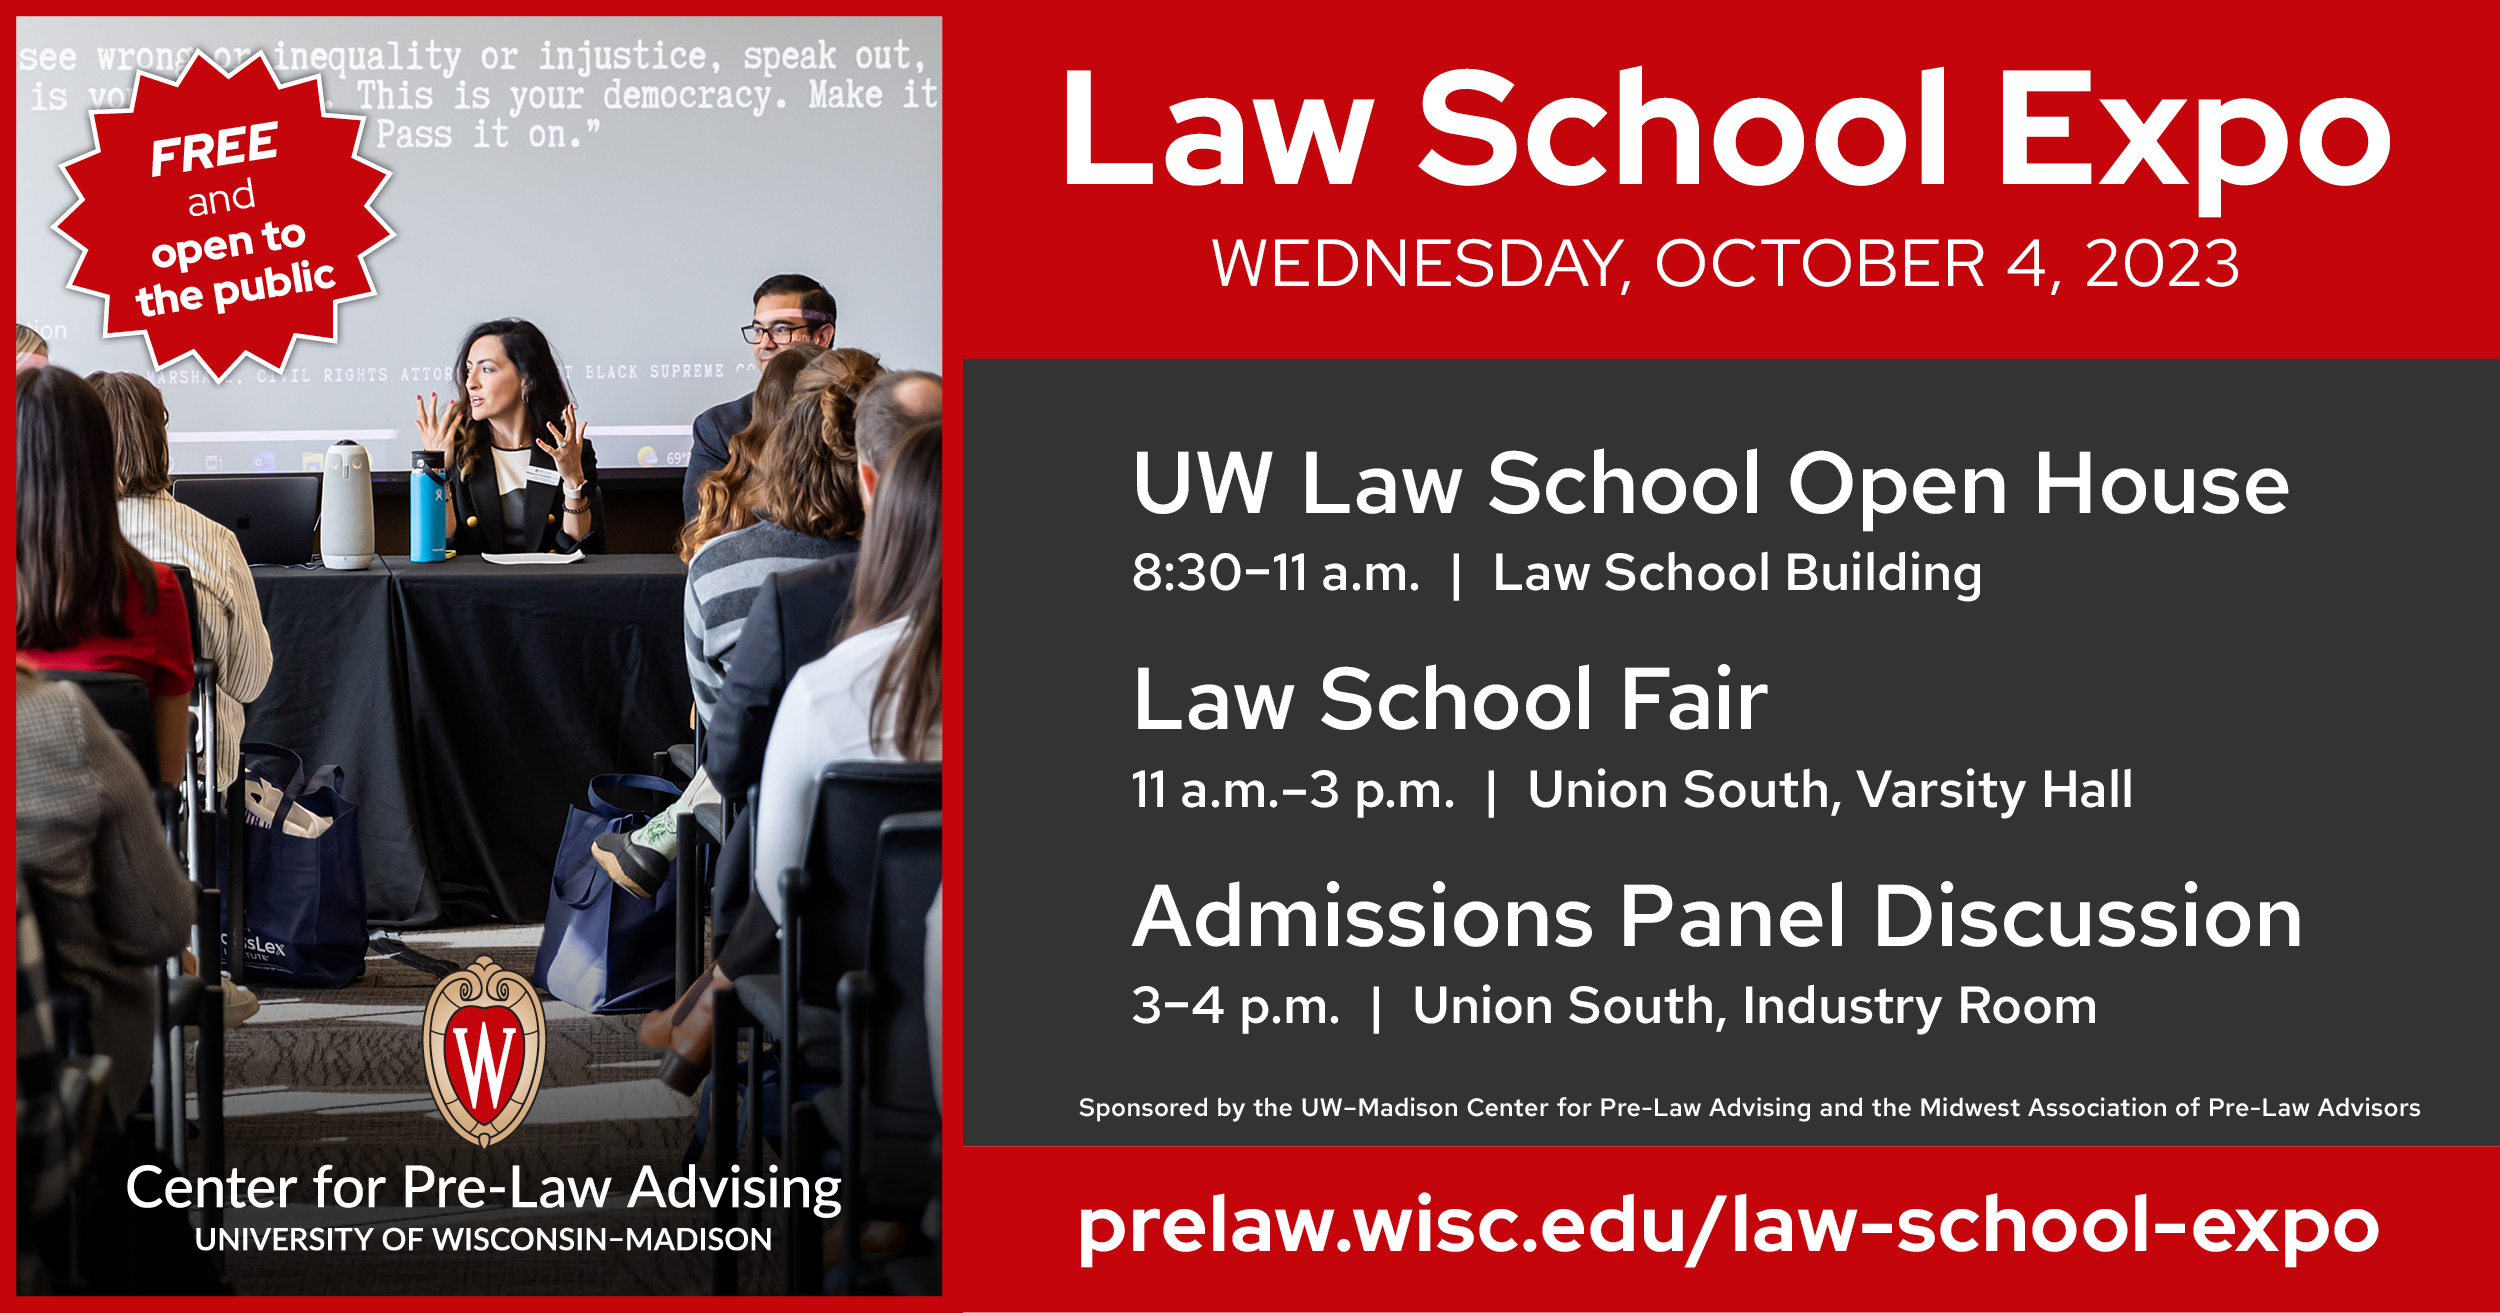 An informational flyer outlining the Law School Expo events, including the schedule for the open house, law school fair, and discussion panel.